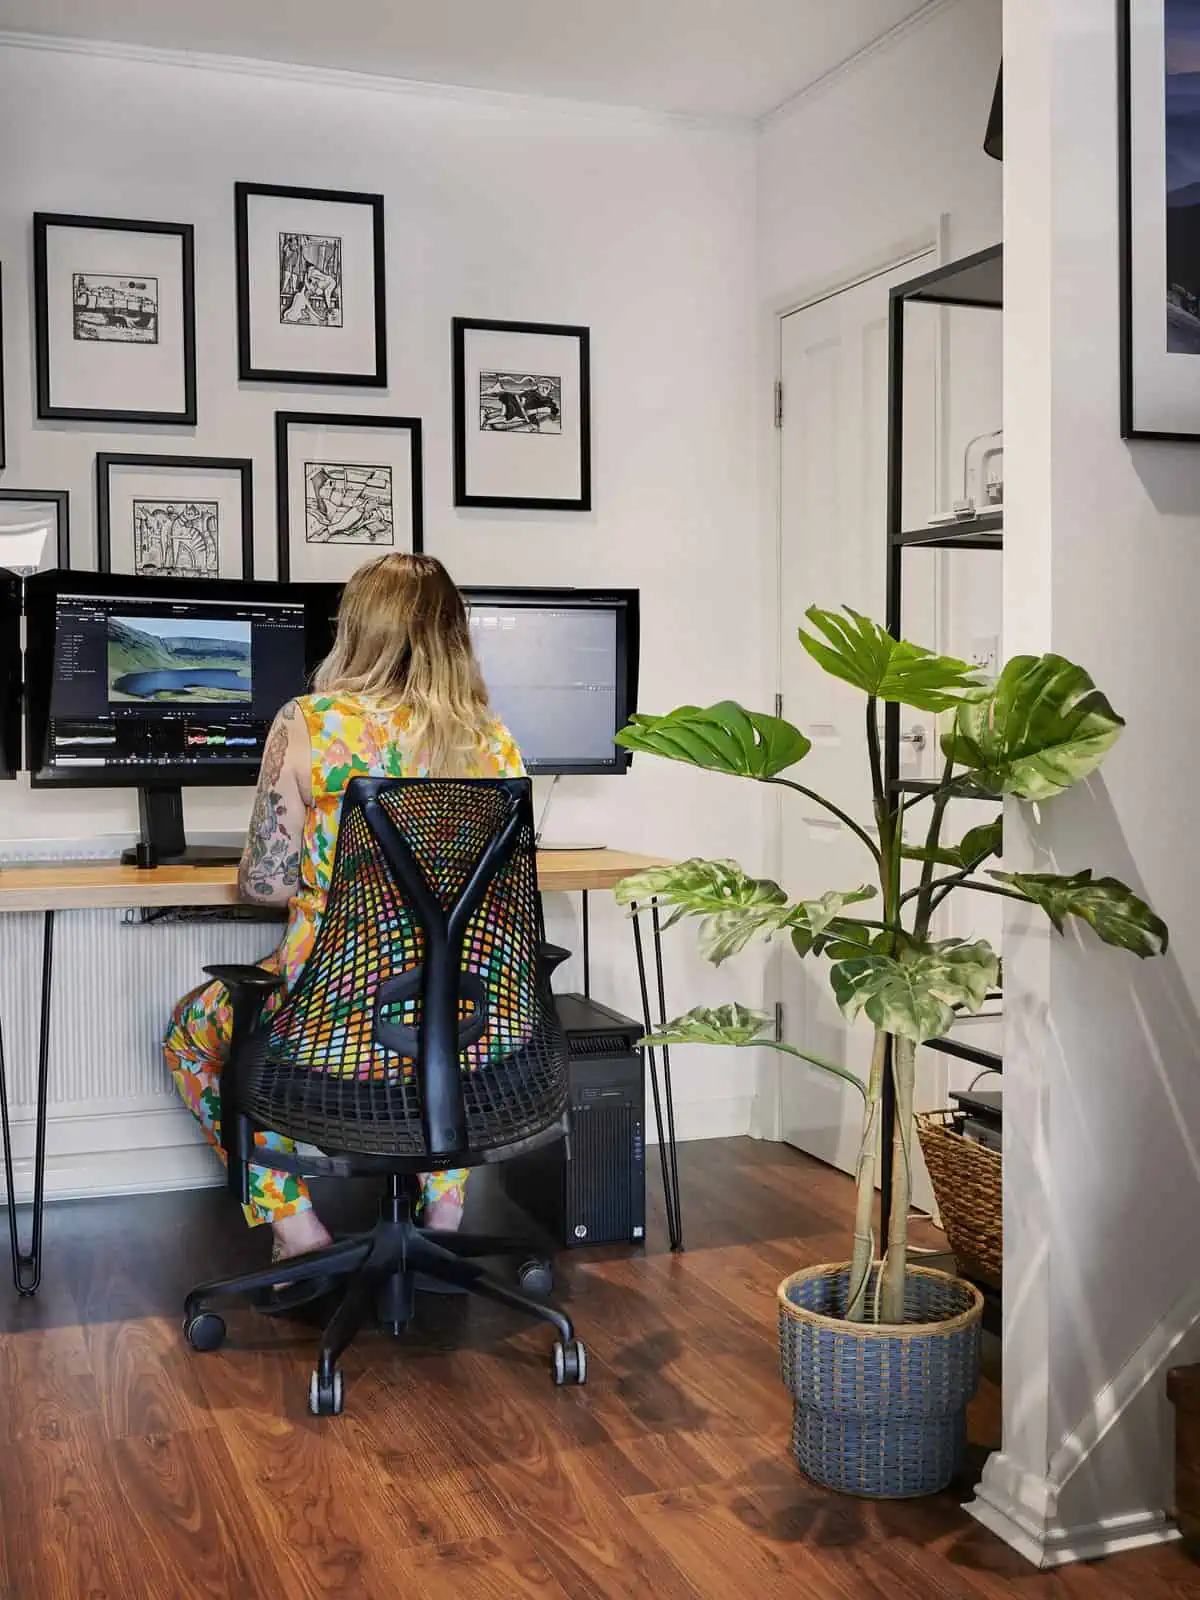 ID: A portrait image. Fay is sat at their desk in the studio. In the foreground is a plant, a wall and shelves. Sat at the desk, Fay is using their computer with two screens on a desk with hair pin legs. Fay is sat in a Sayl chair and is wearing a bright patterned jumpsuit. On the screens is editing software.